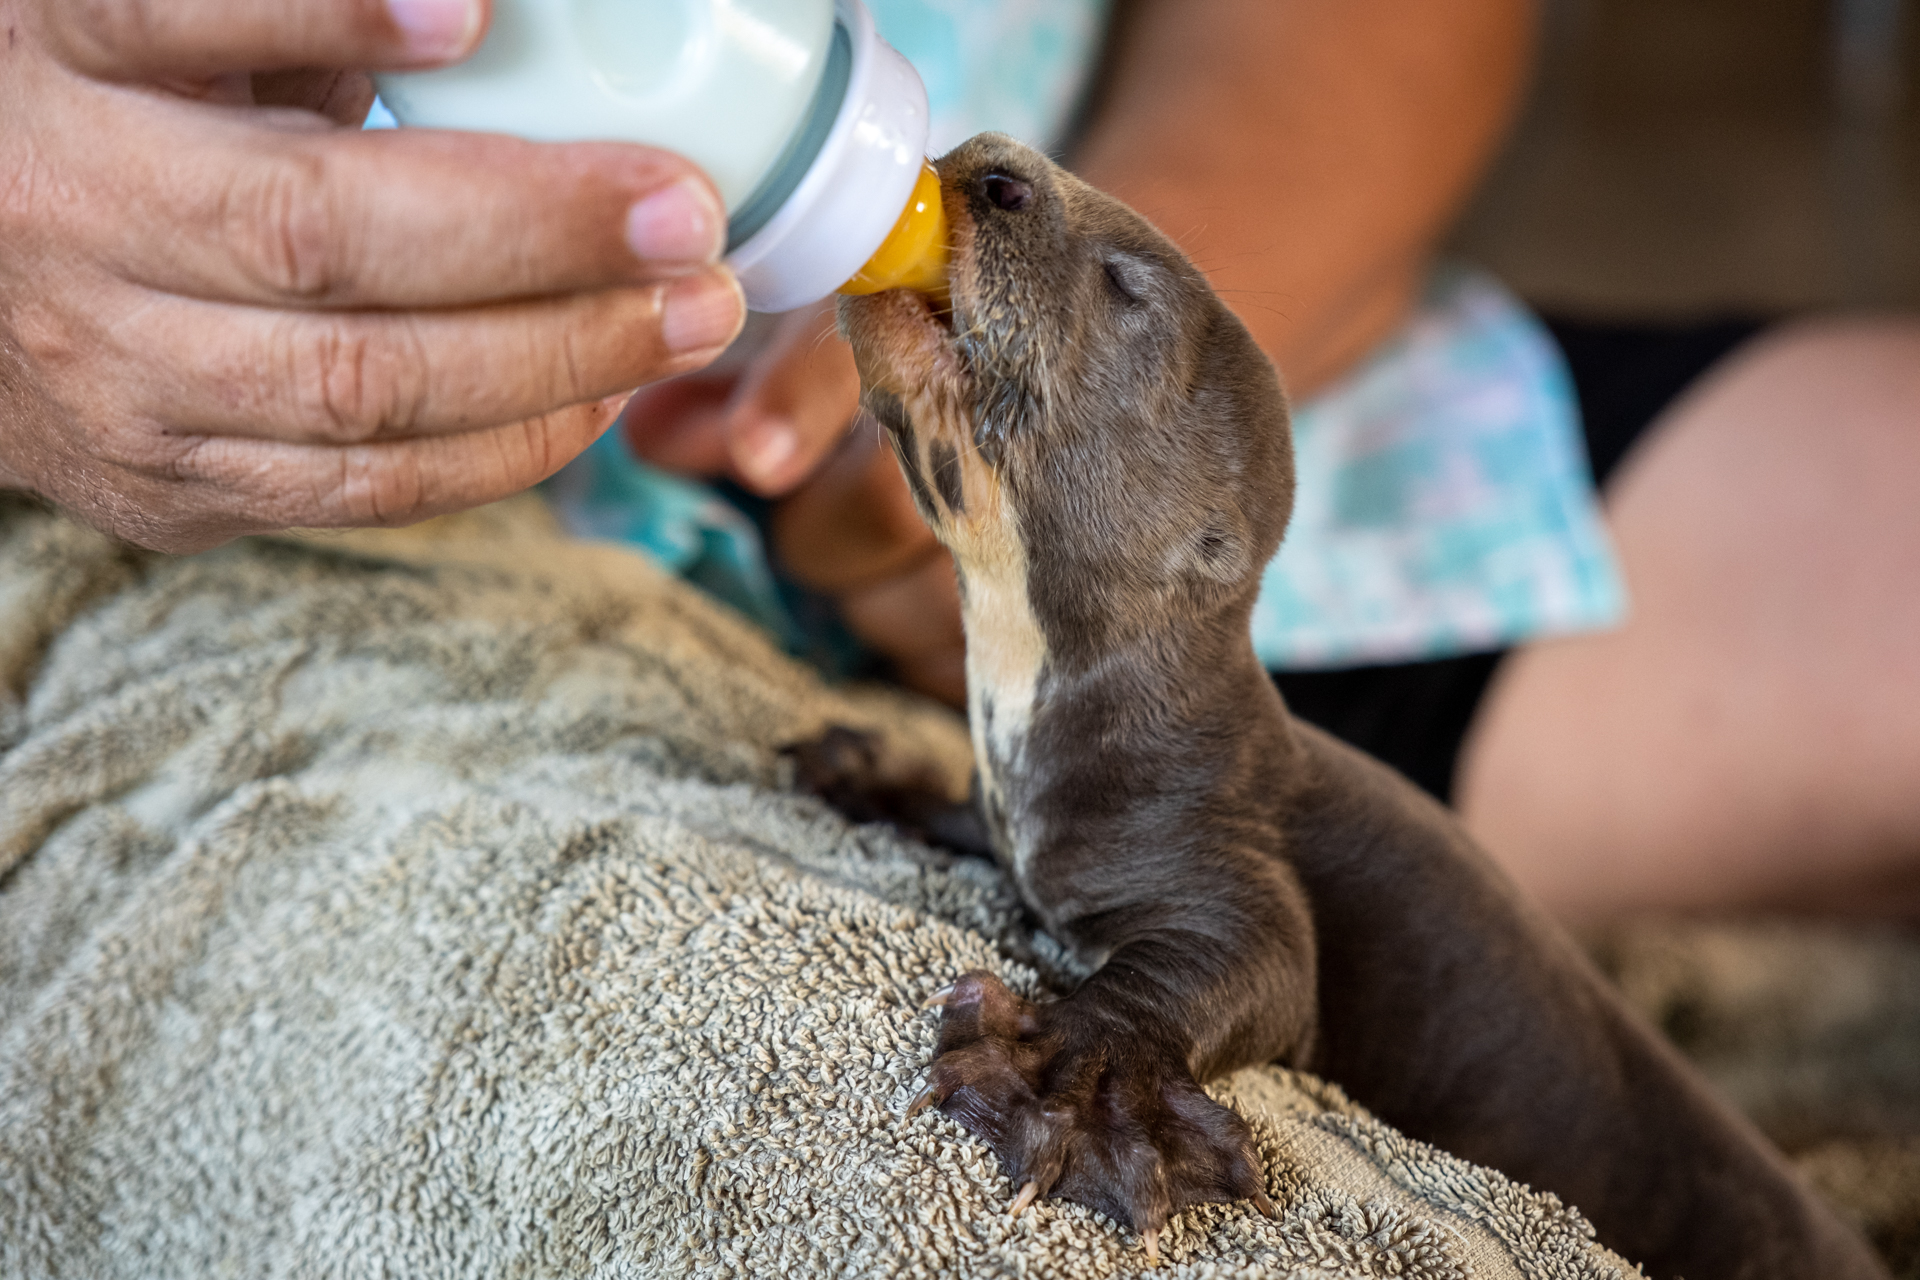 Giant Otter Baby being fed by Lodge Owner in Guyana.